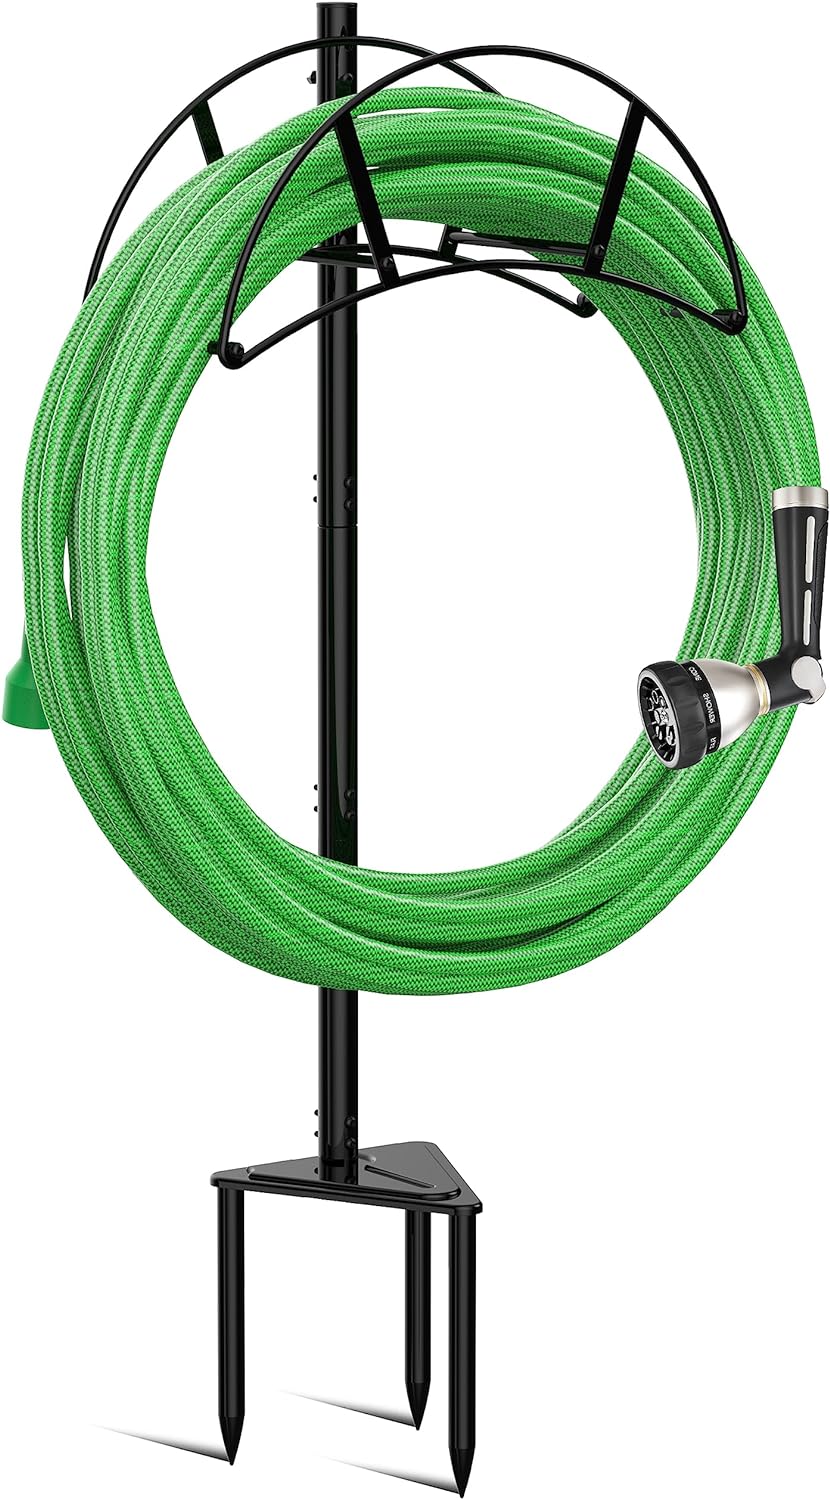 Garden Hose Stand /Hanger Freestanding, Water Hose Holder Stake, In ground Heavy Duty Hose Rack Organizer Outdoor for Outside Yard, Sturdy to Hold 150ft Hose (Metal, Black)